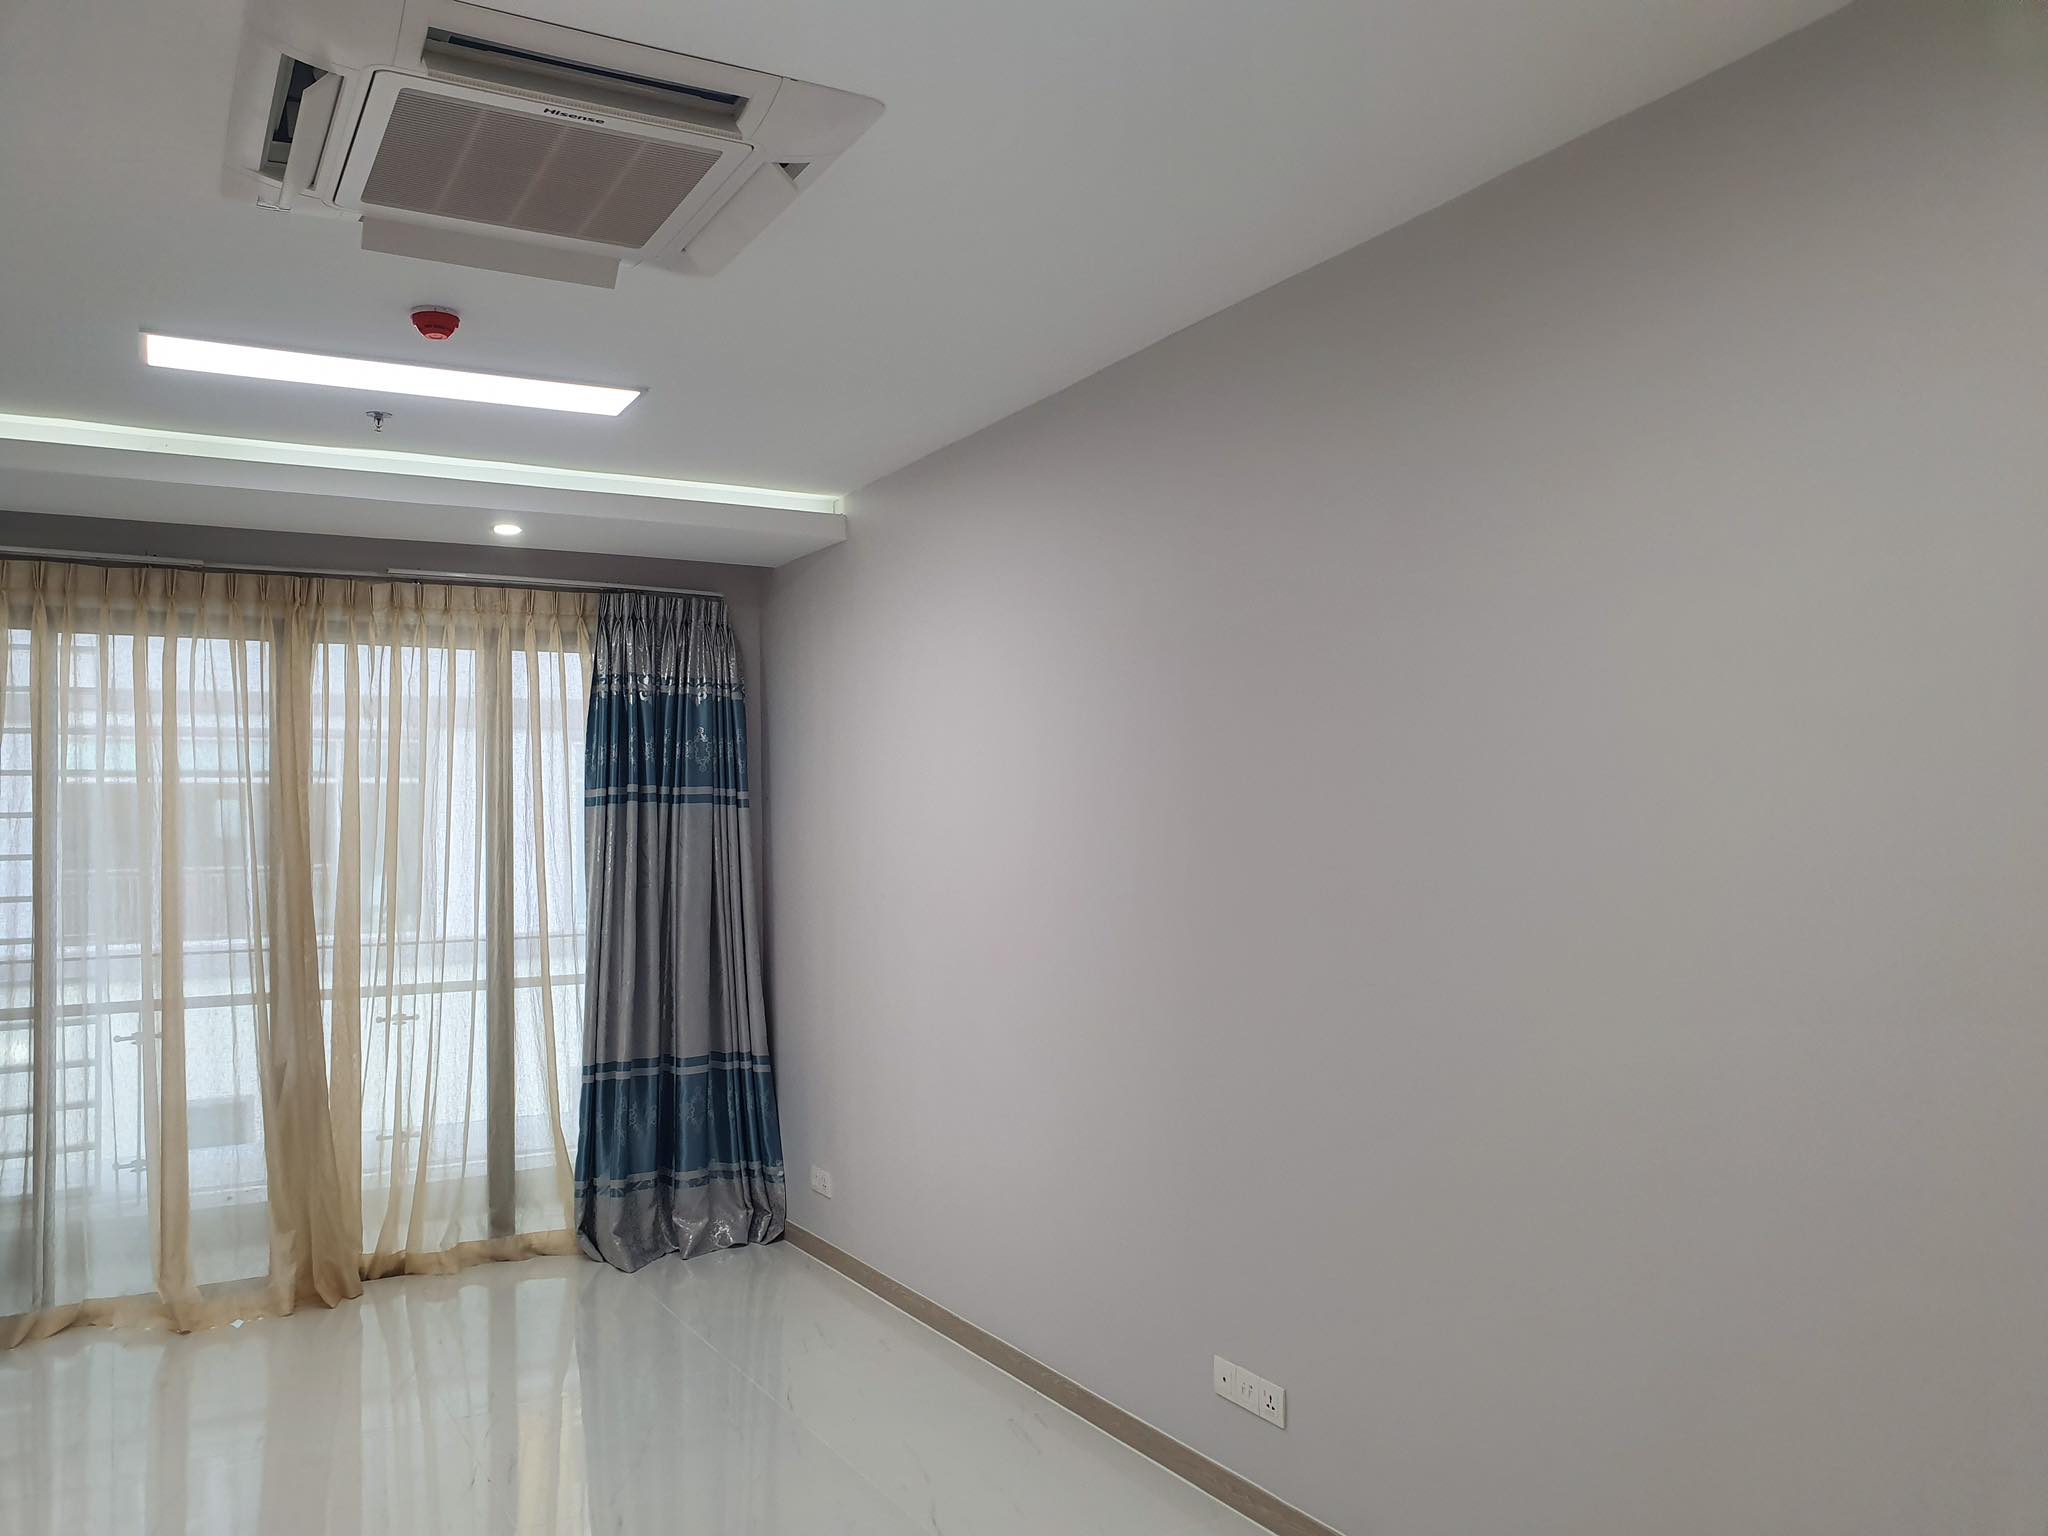 45m2 SOHO for rent, located in central of Phnom Penh, at C7 Olympia City!